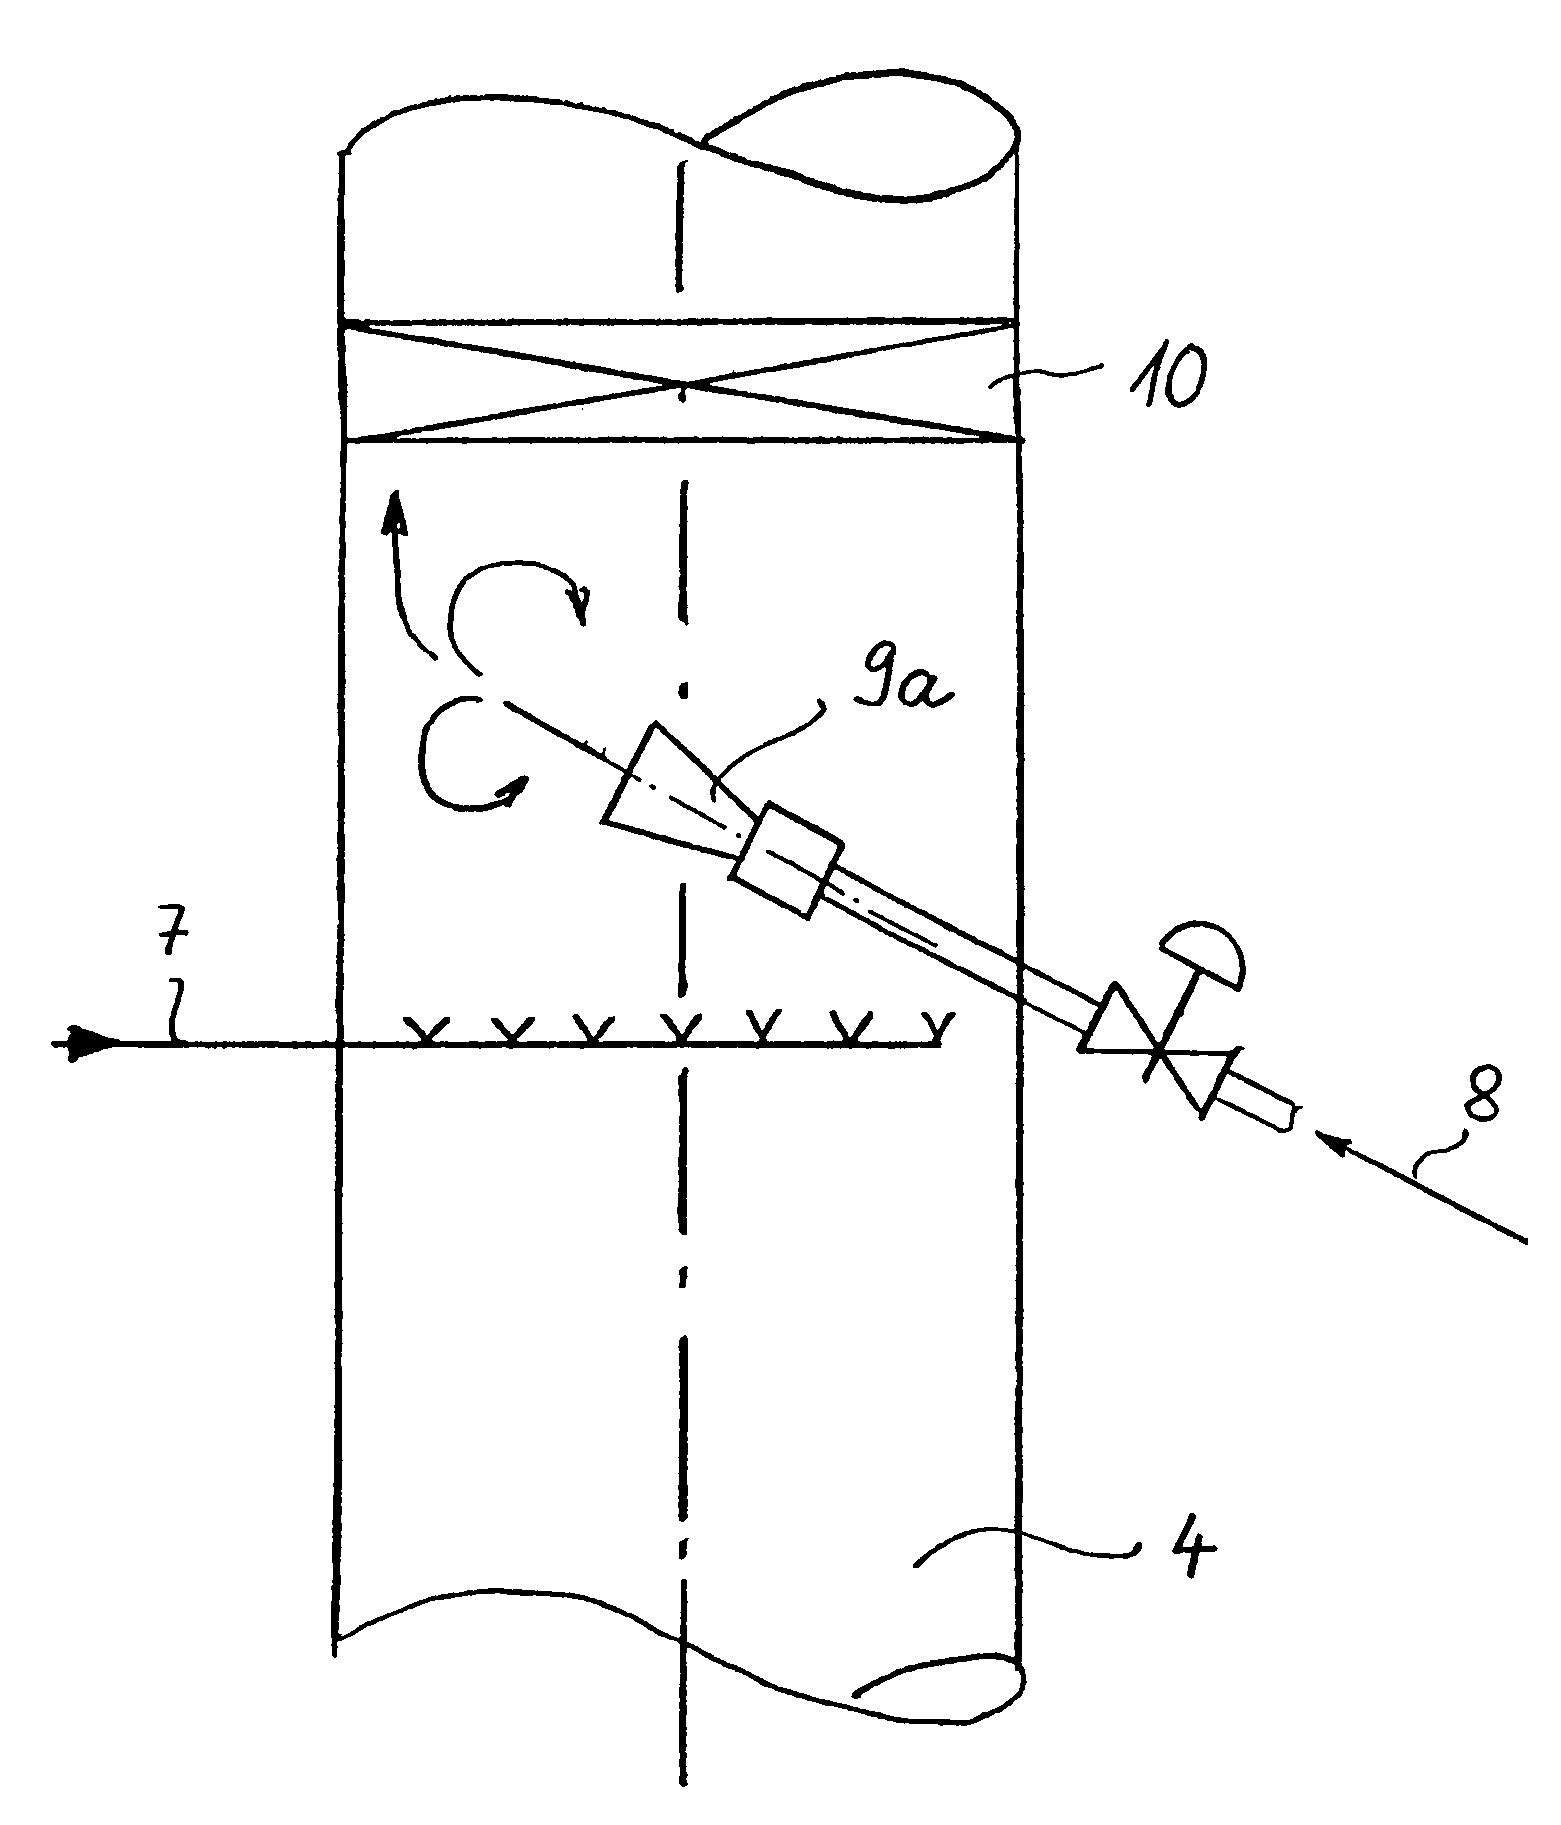 Method for producing 1,2-dichloroethane by means of direct chlorination